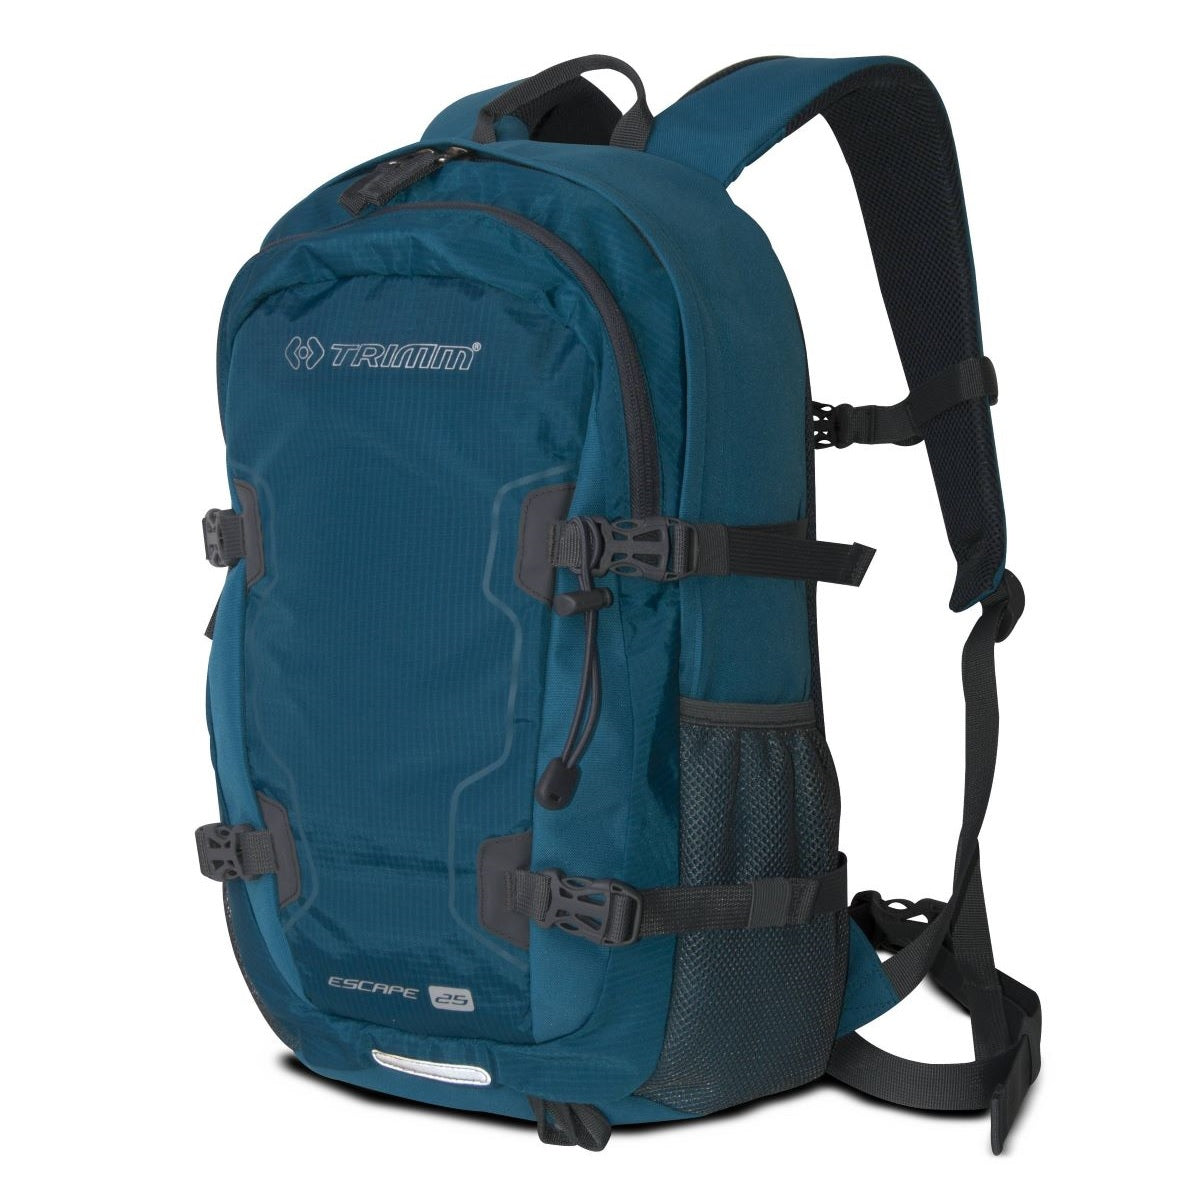 Escape 25L Backpack